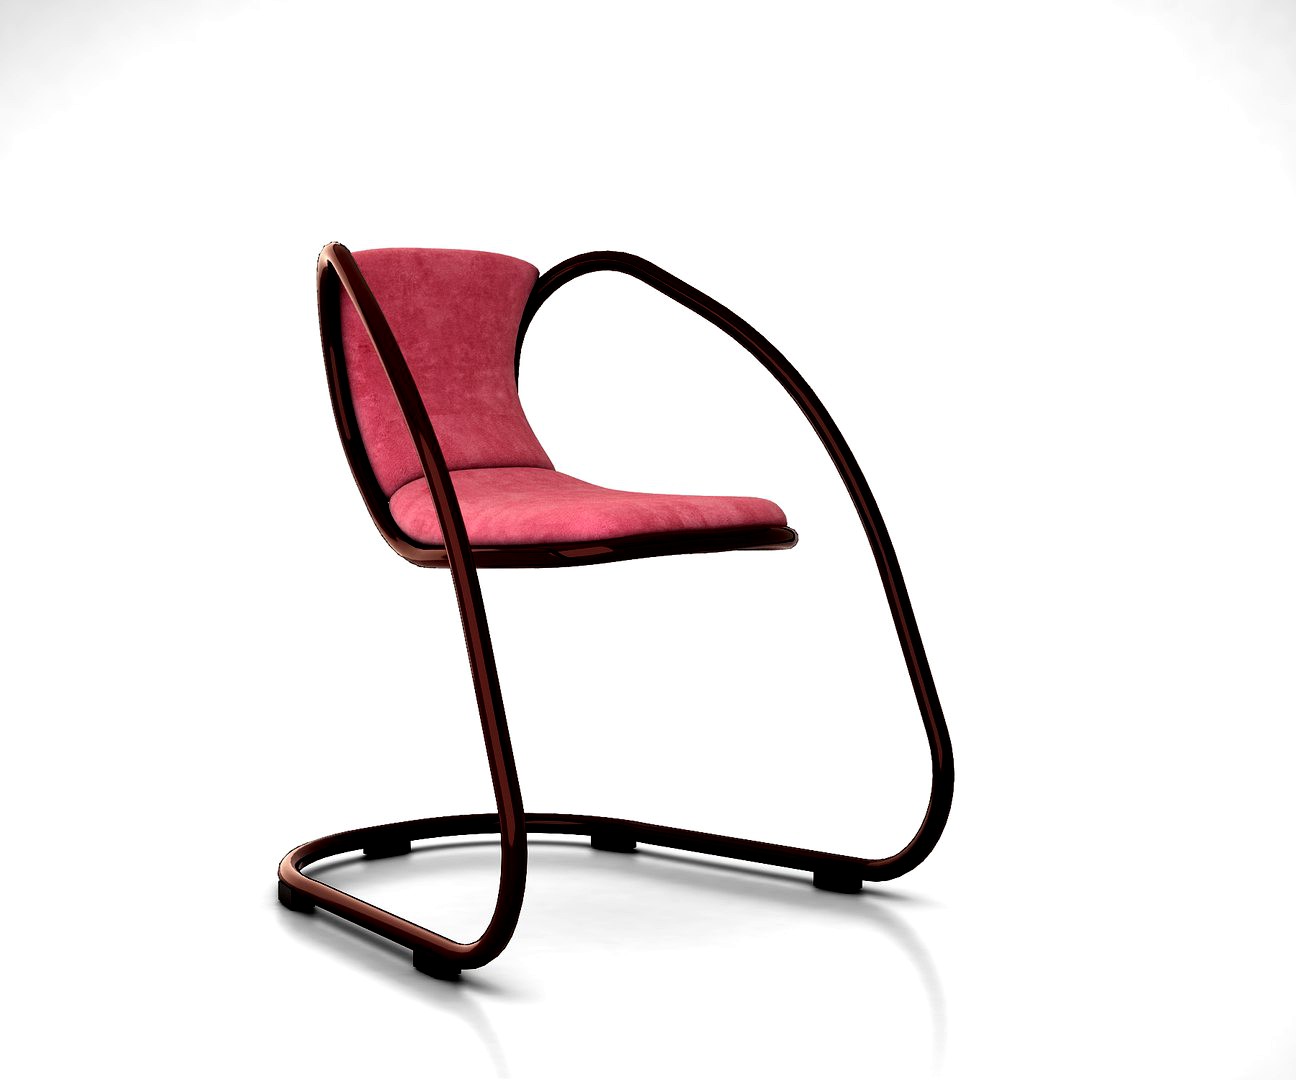 Cantilever chair by Luxy Timeless